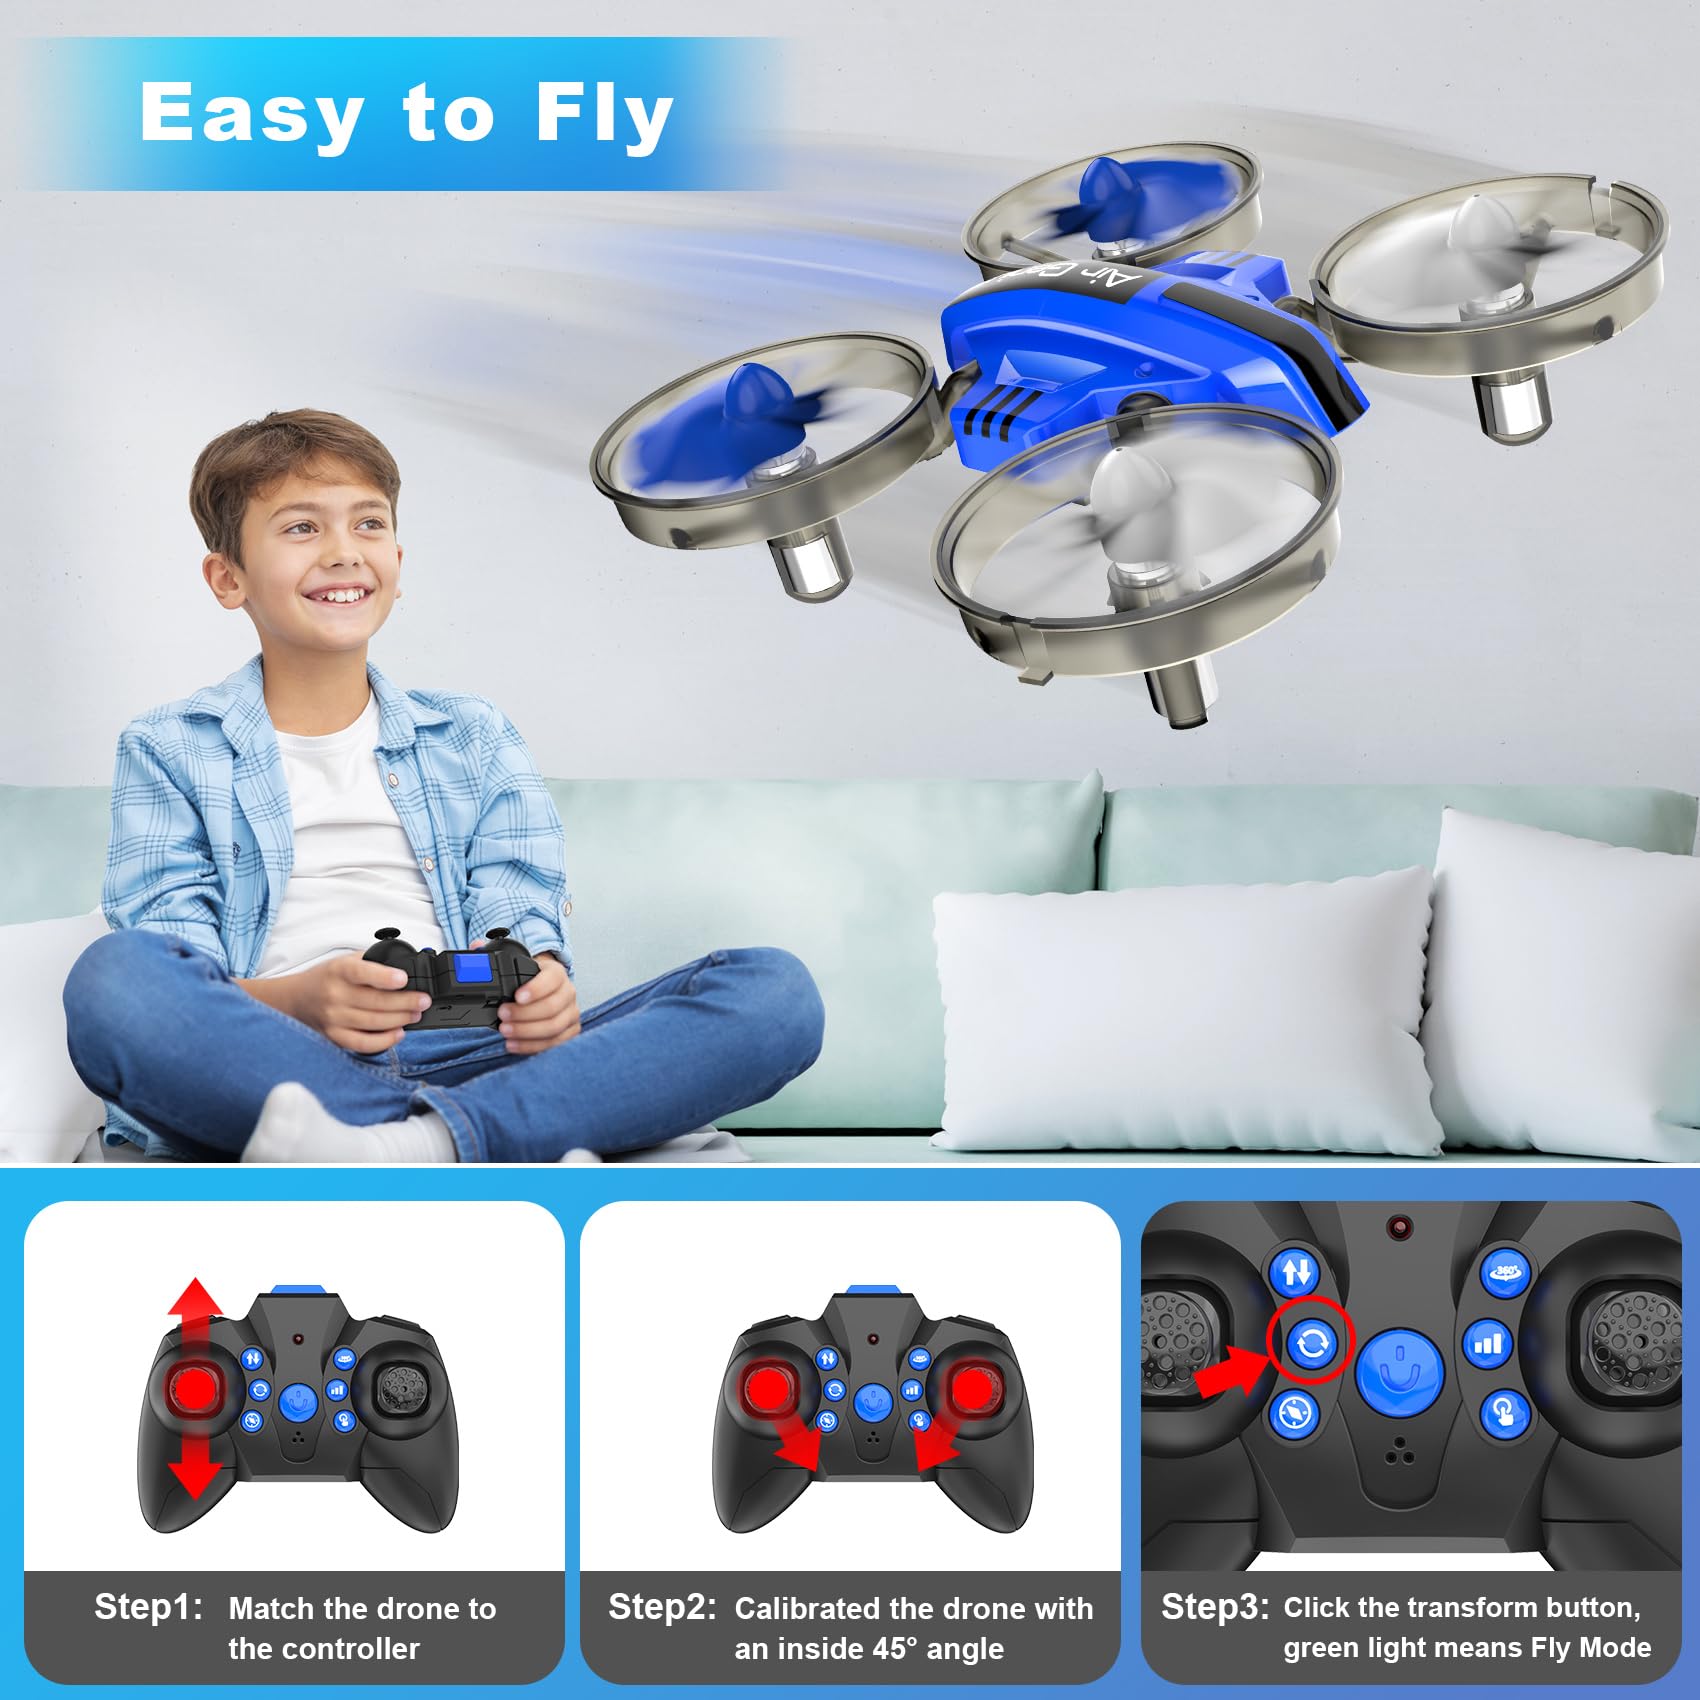 Oddire Mini Drone for Kids 8-12 & Adults, Drones & Cars 2 in 1 Toy with One Key Take Off-Landing, Altitude Hold, Headless Mode, 360° flip, Car Mode, 2 Batteries, Gift Kids Toys for Boys and Girls